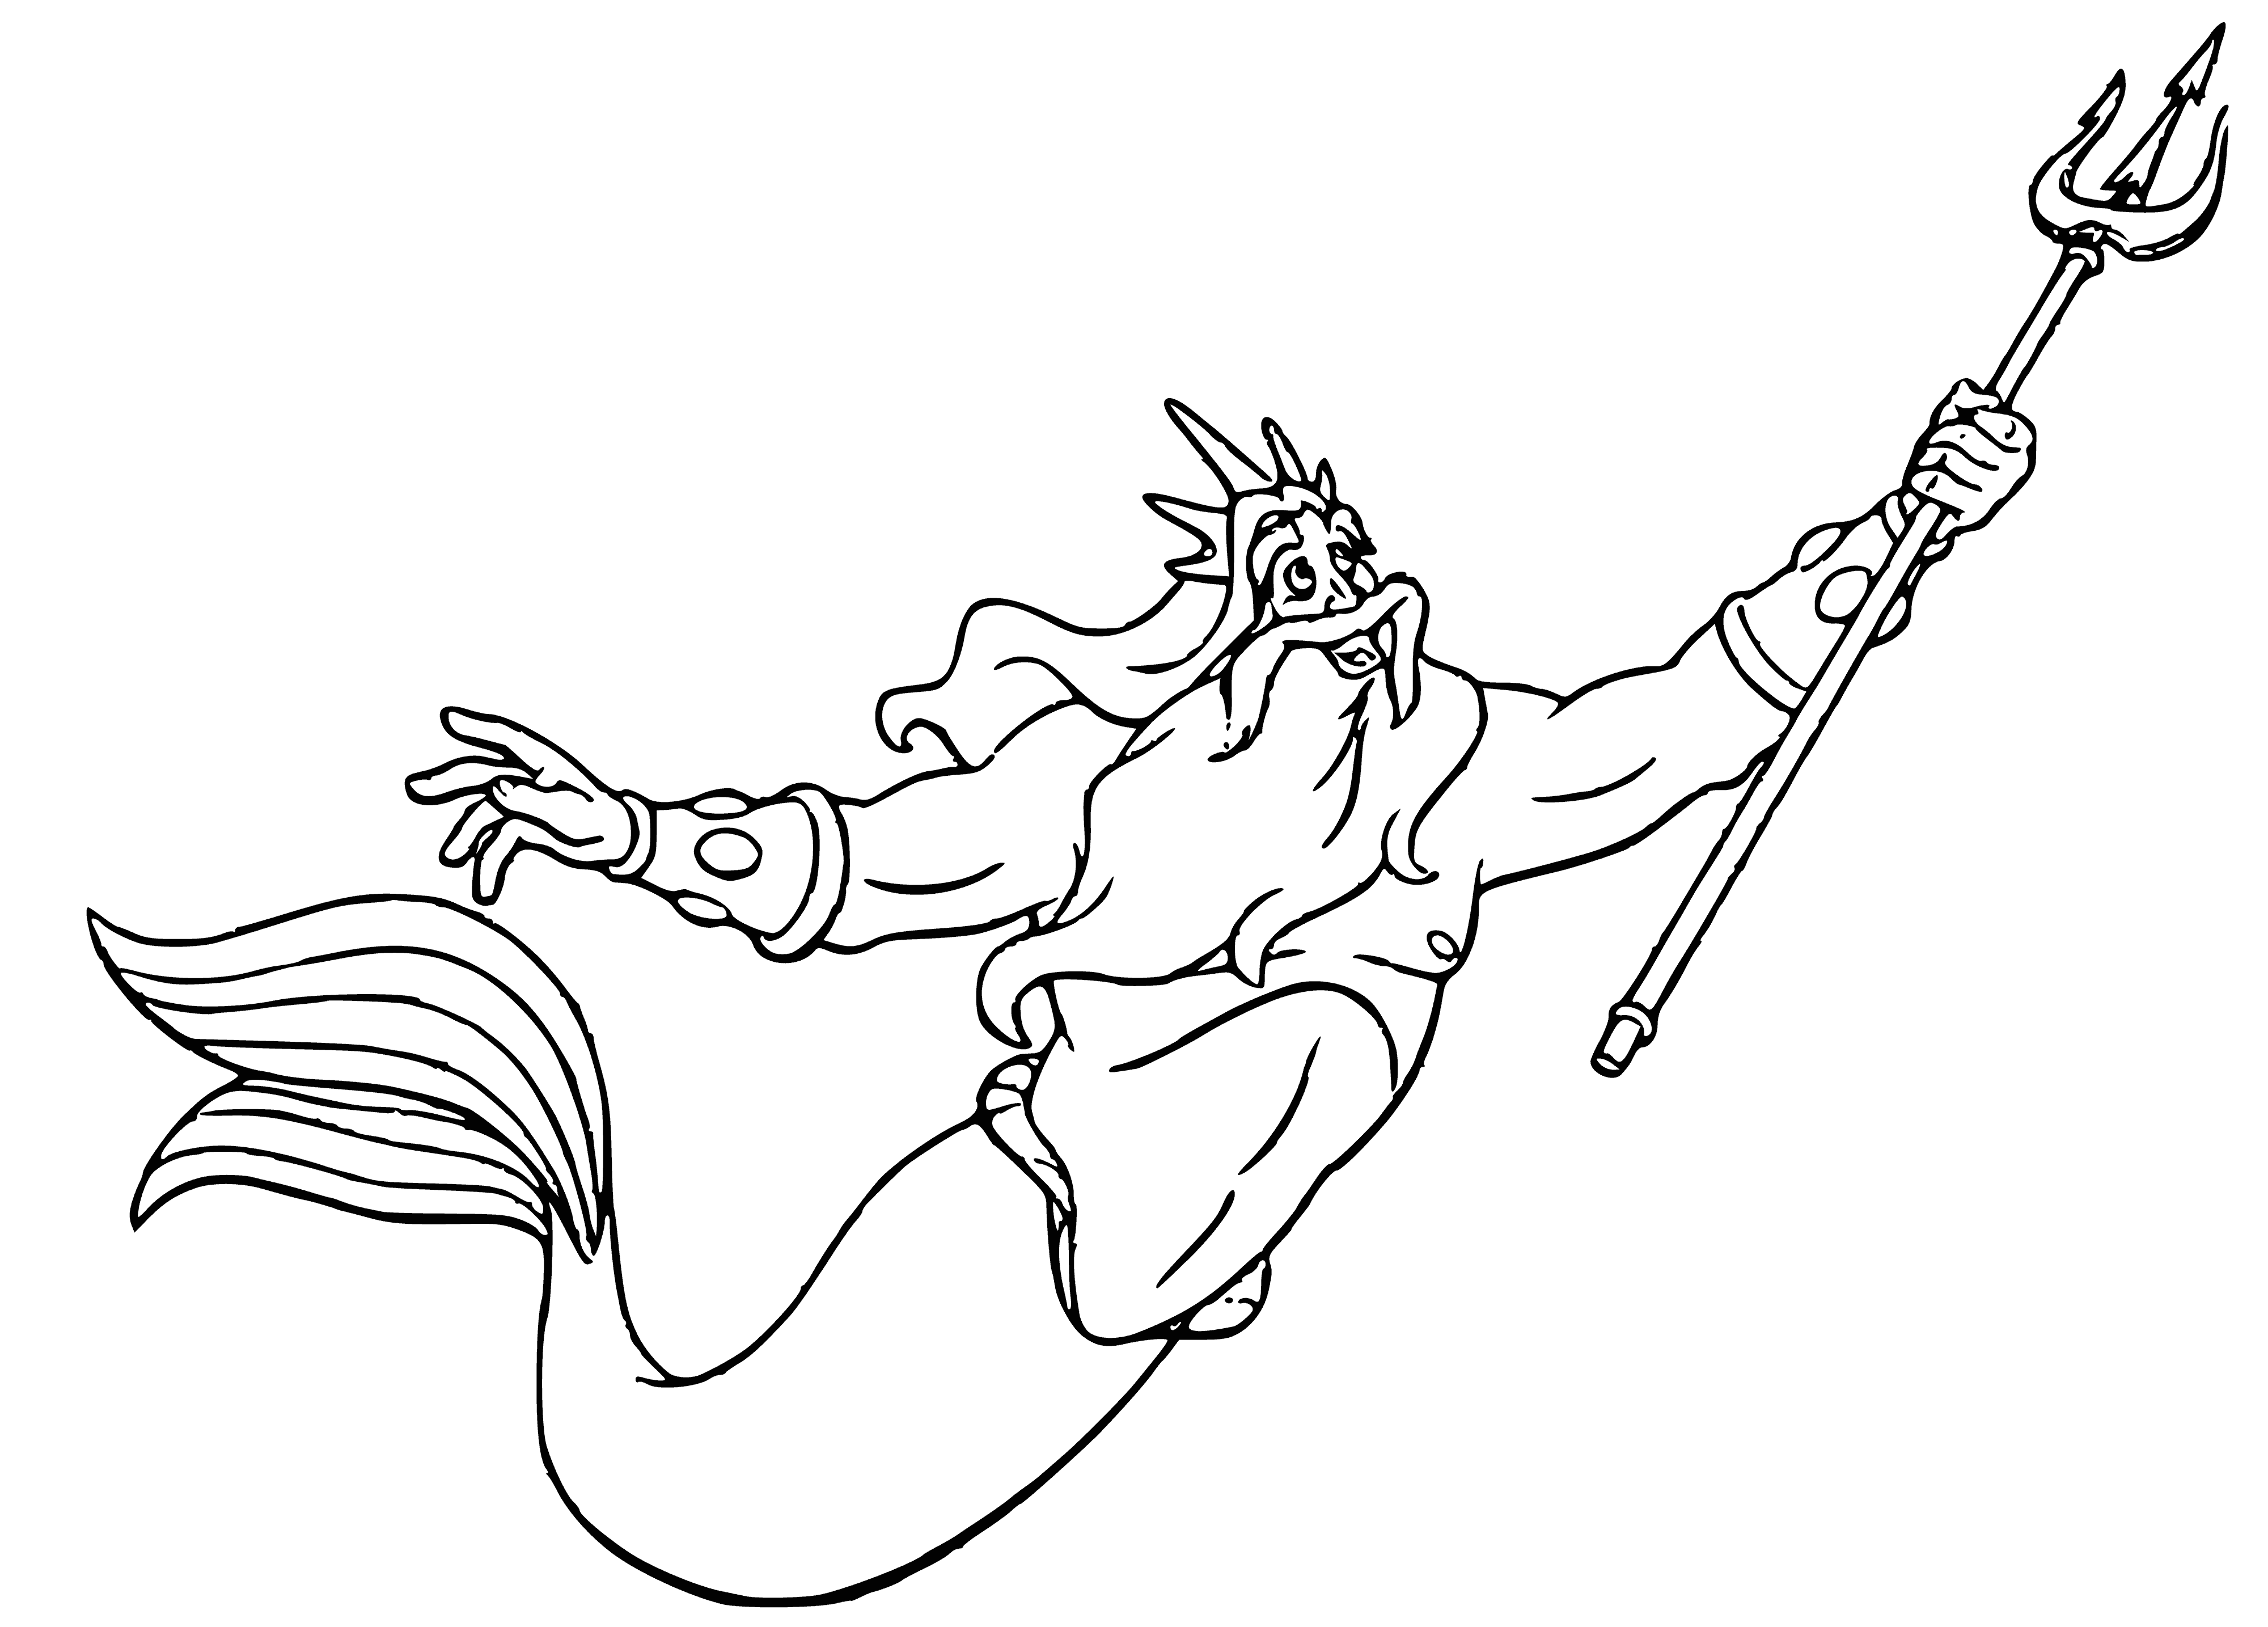 coloring page: The Little Mermaid looks at a statue of Neptune with a trident, crown and a shell in front.